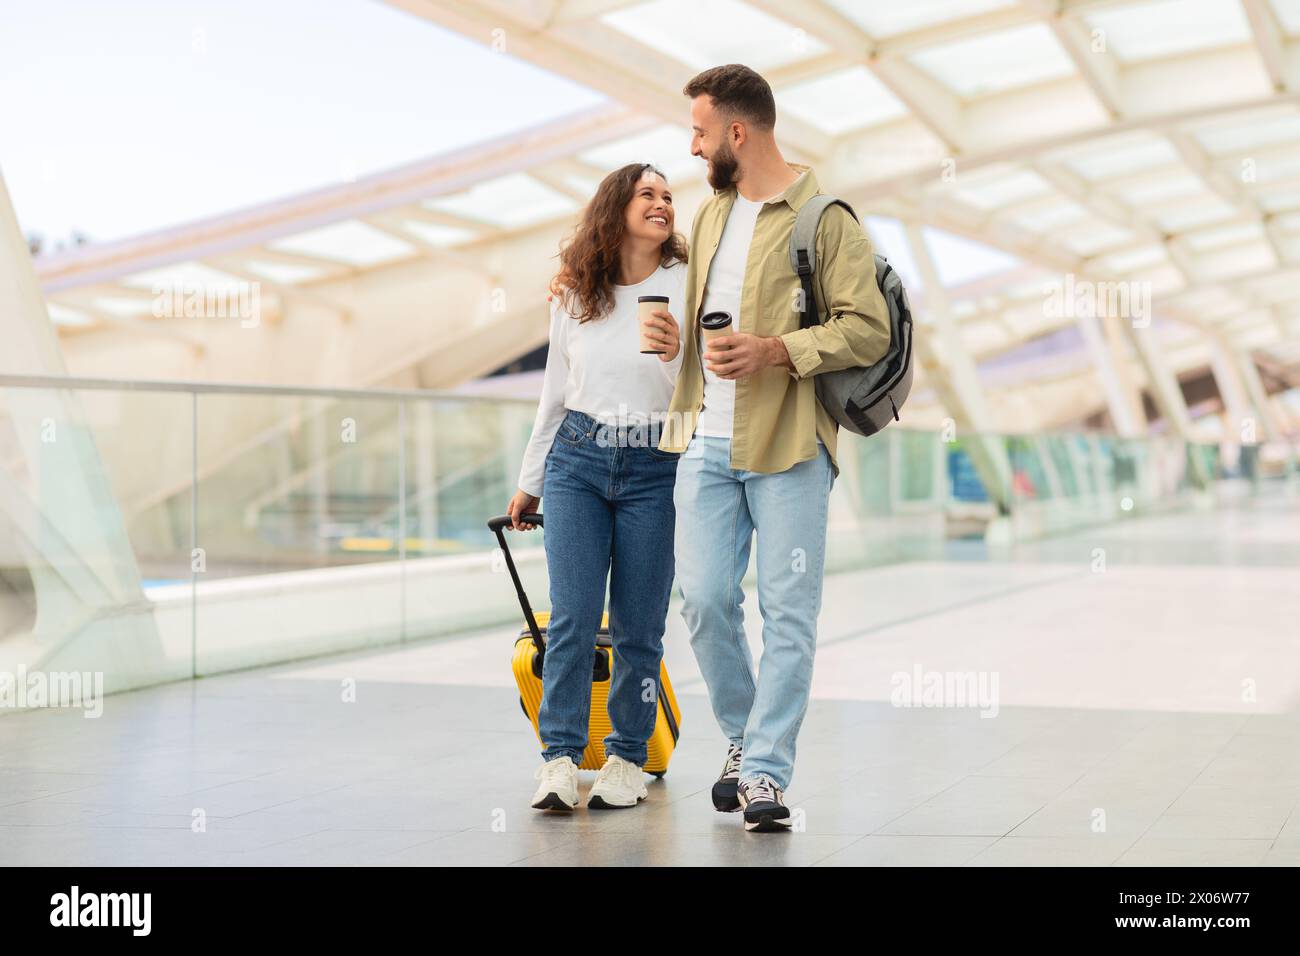 Man and Woman Walking Through Airport With Luggage And Takeaway Coffee Stock Photo